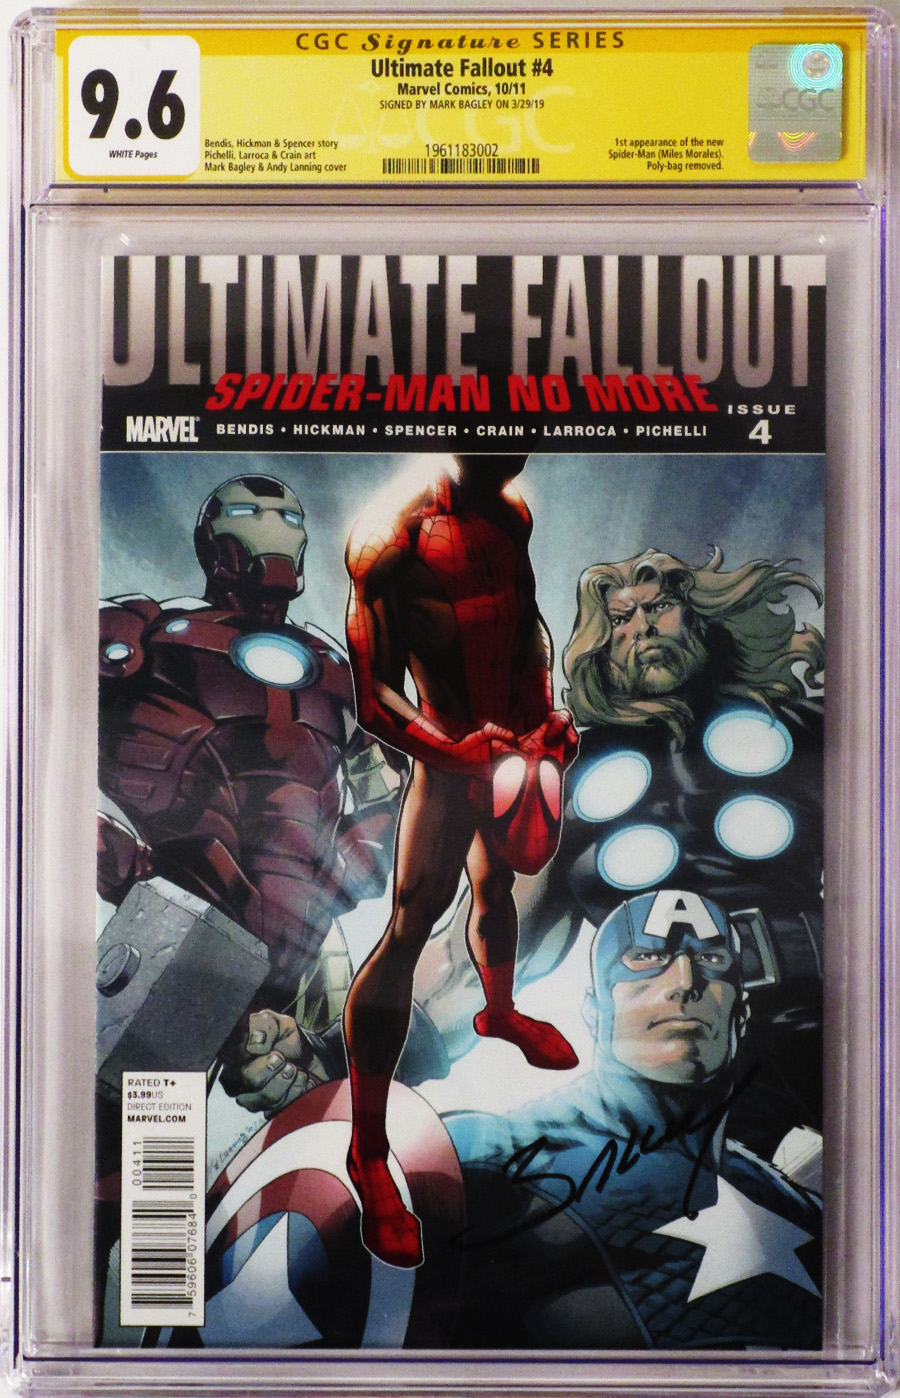 Ultimate Comics Fallout #4 Cover K 1st Ptg Regular Mark Bagley Cover CGC Signature Series 9.6 Signed by Mark Bagley (Death Of Spider-Man Tie-In)